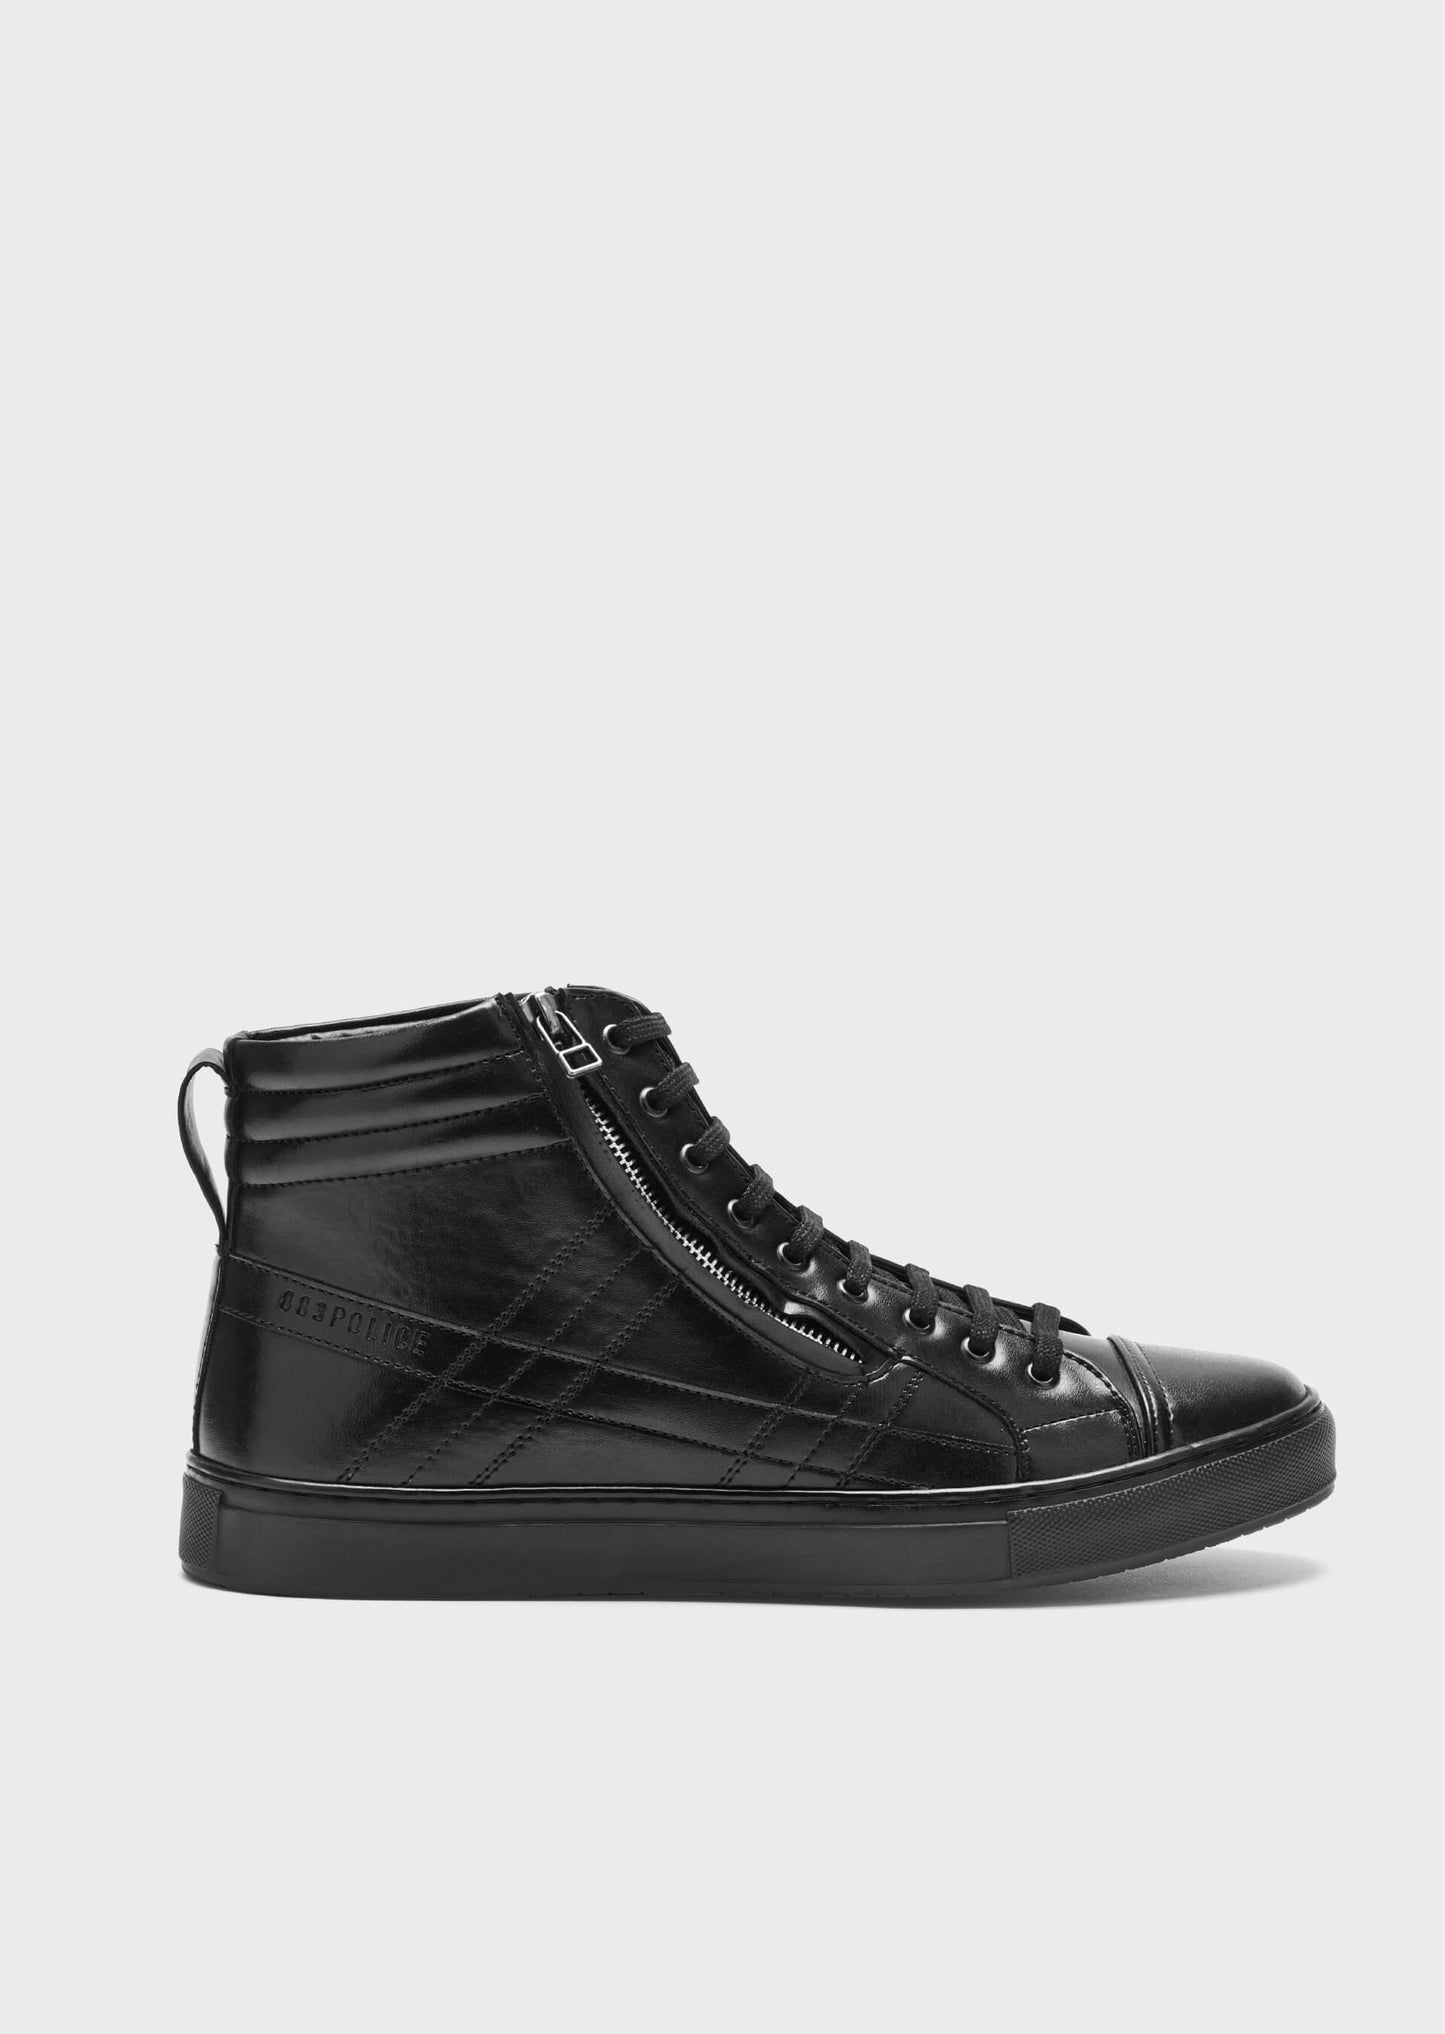 Spyder Black High Top Trainers